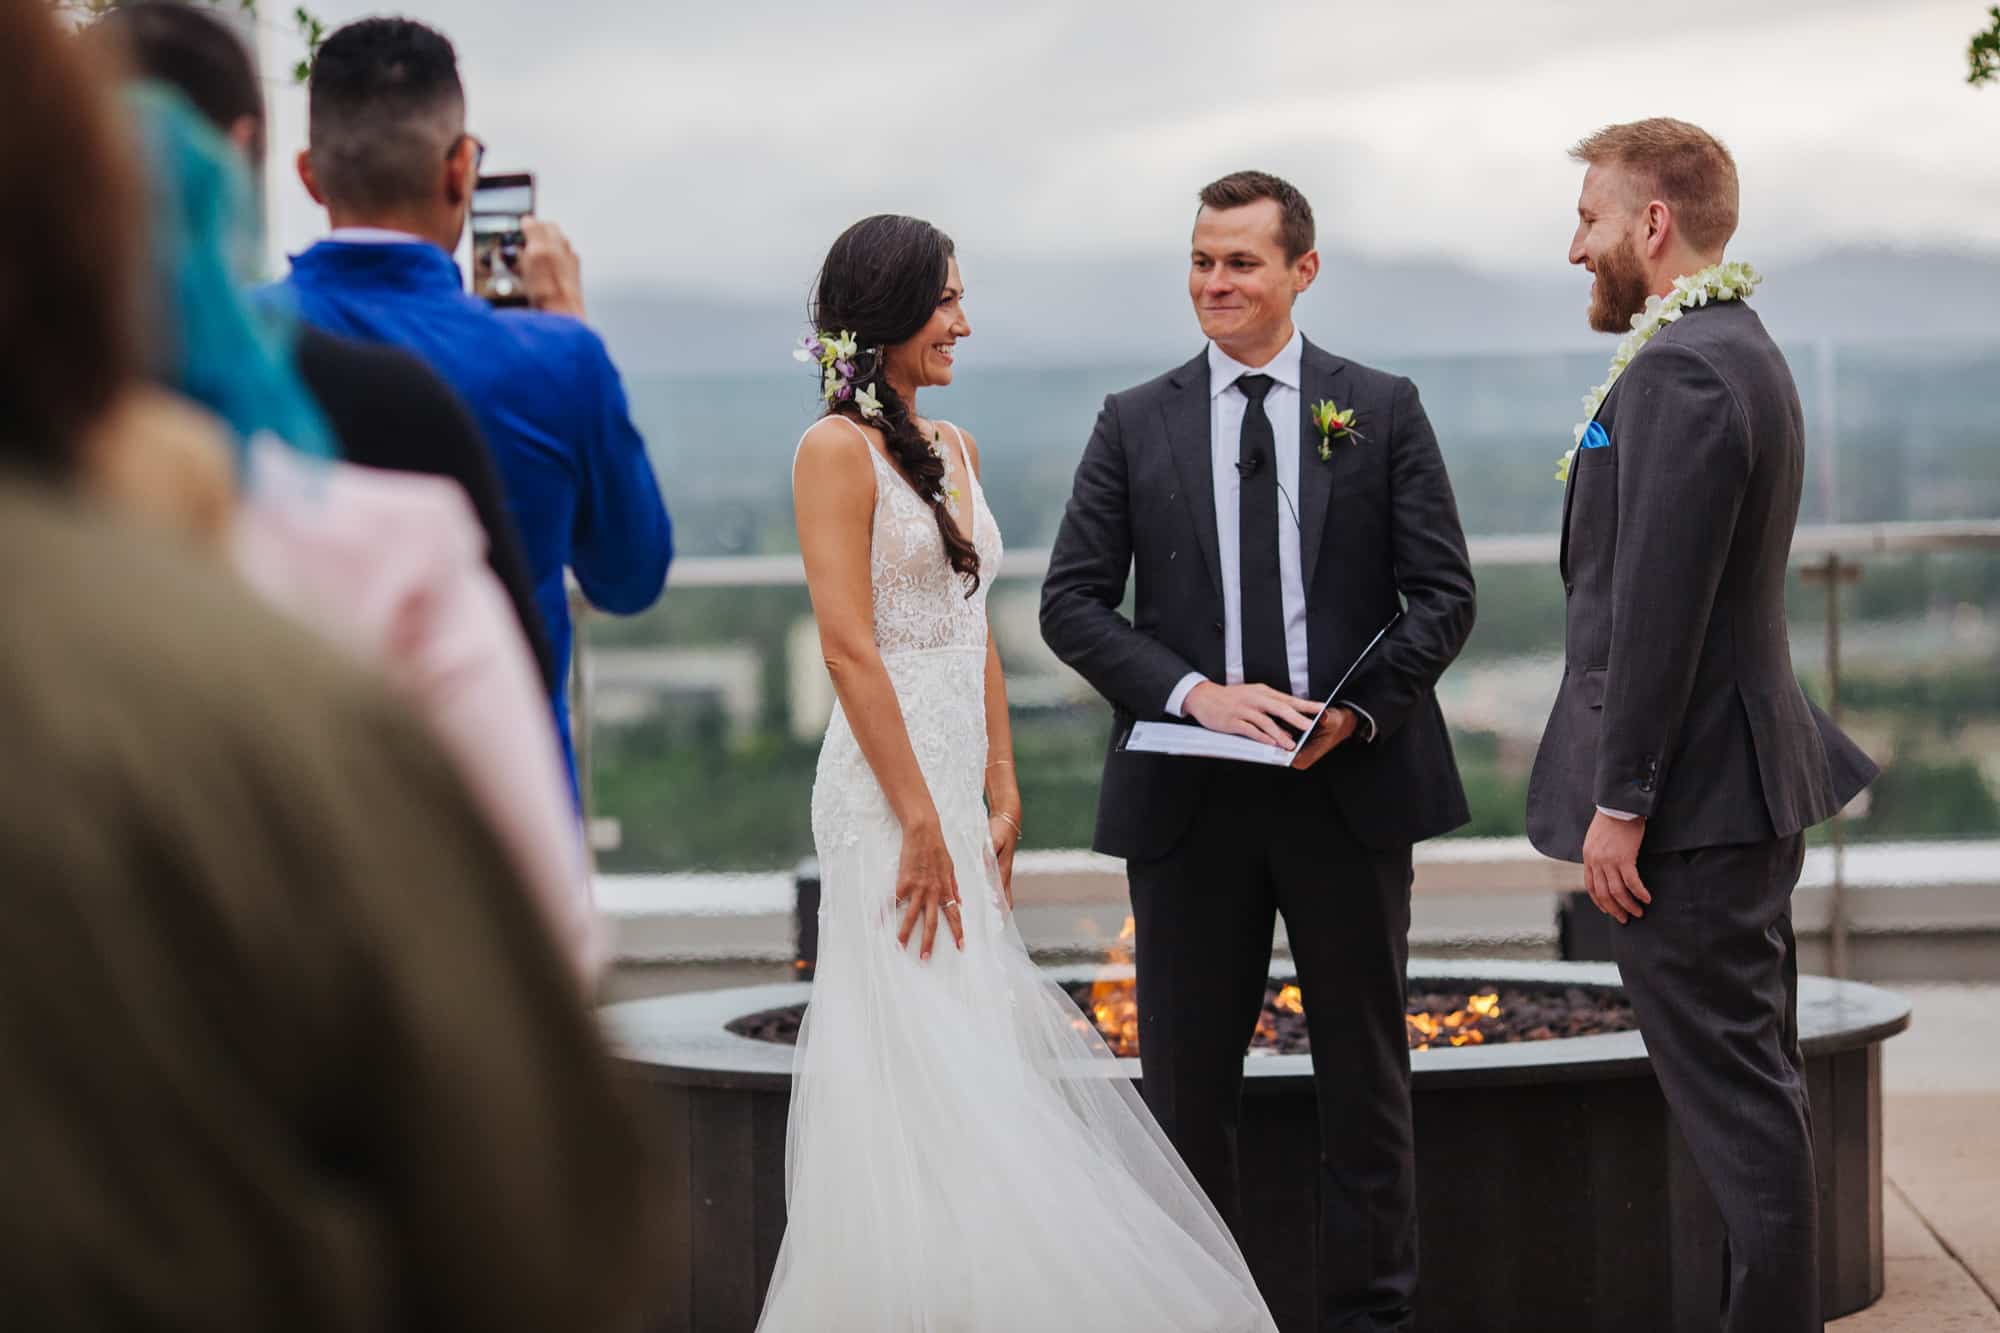 outdoor wedding ceremony, the terrace at colorado center wedding, denver wedding venue, outdoor ceremony, summer wedding, outdoor wedding, bride side braid, rooftop wedding ceremony, best wedding photographers in denver